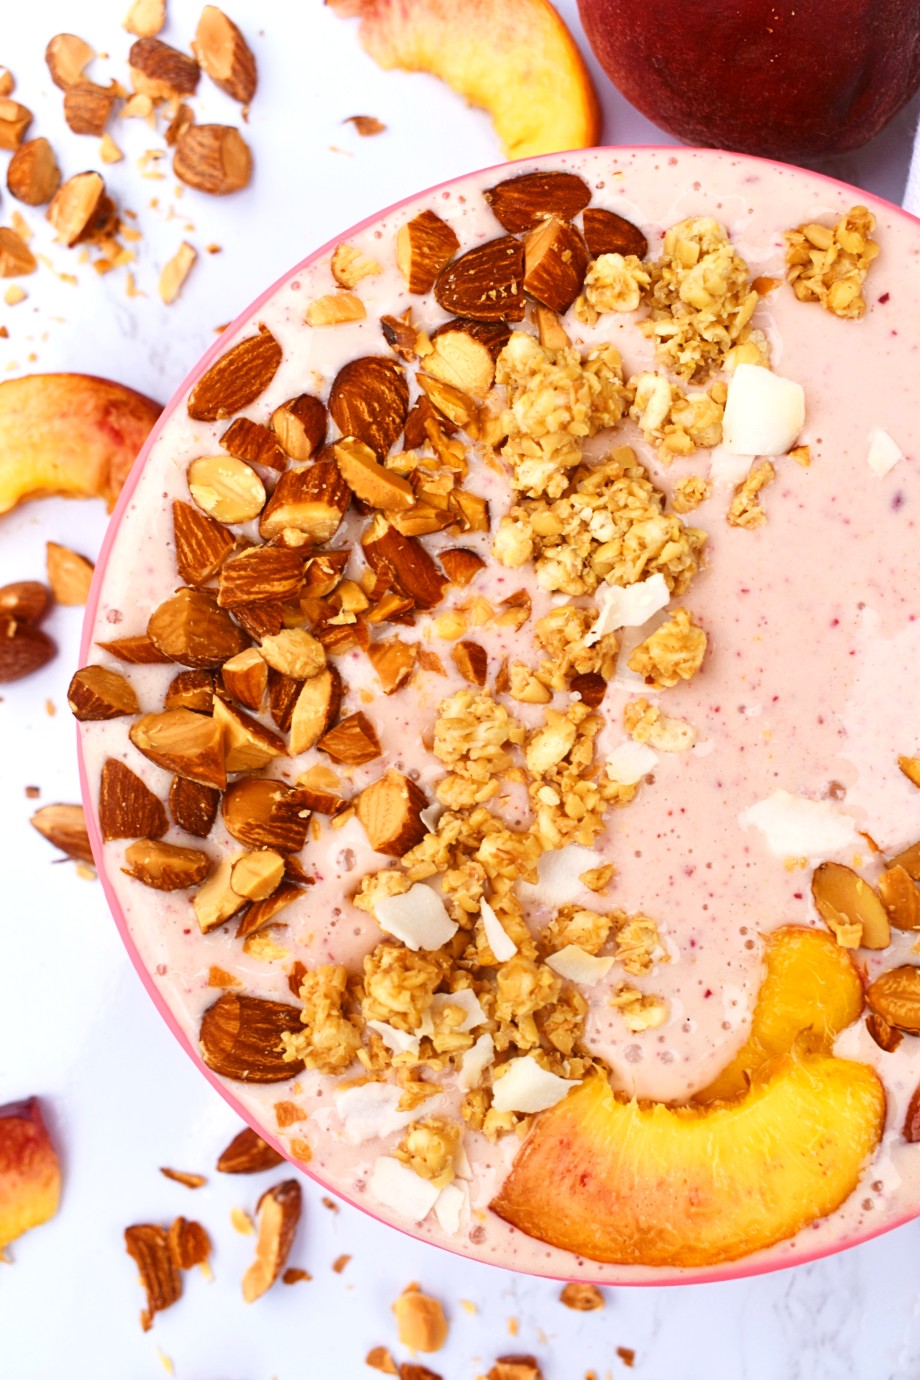 Peaches and Cream Smoothie Bowls